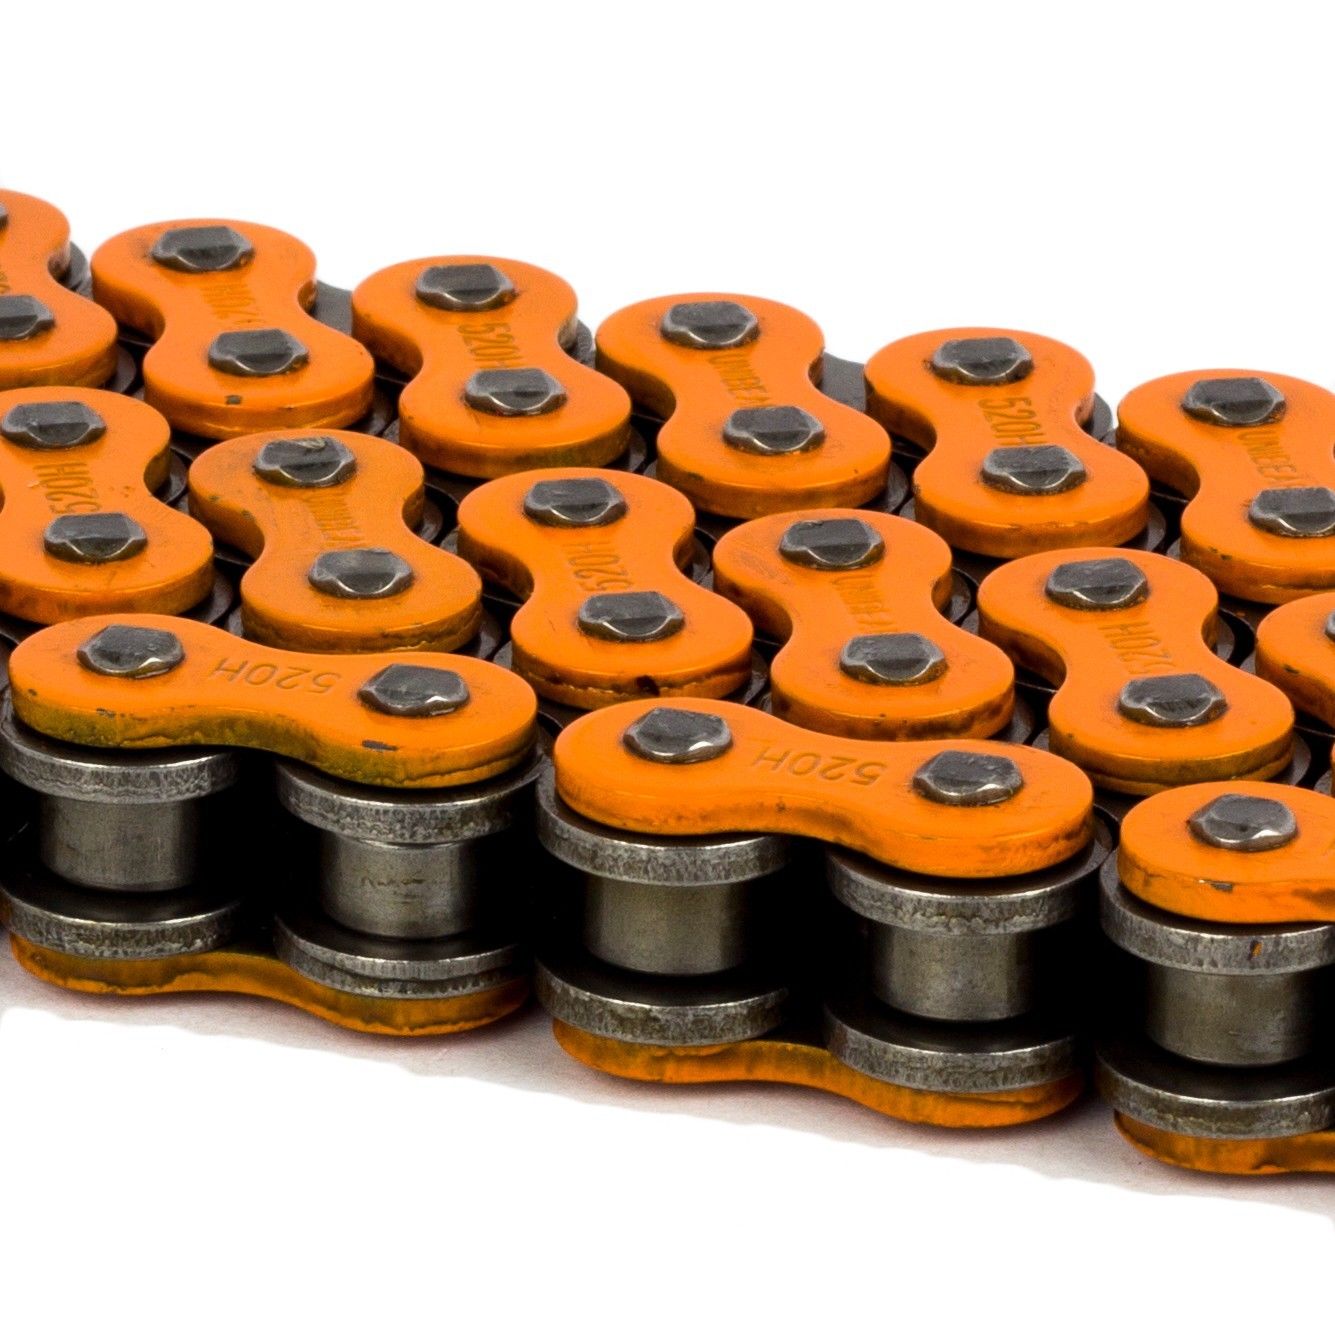 Unibear 520 Orange Heavy Duty Motorcycle Chain 110 Links with 1 Connecting Link